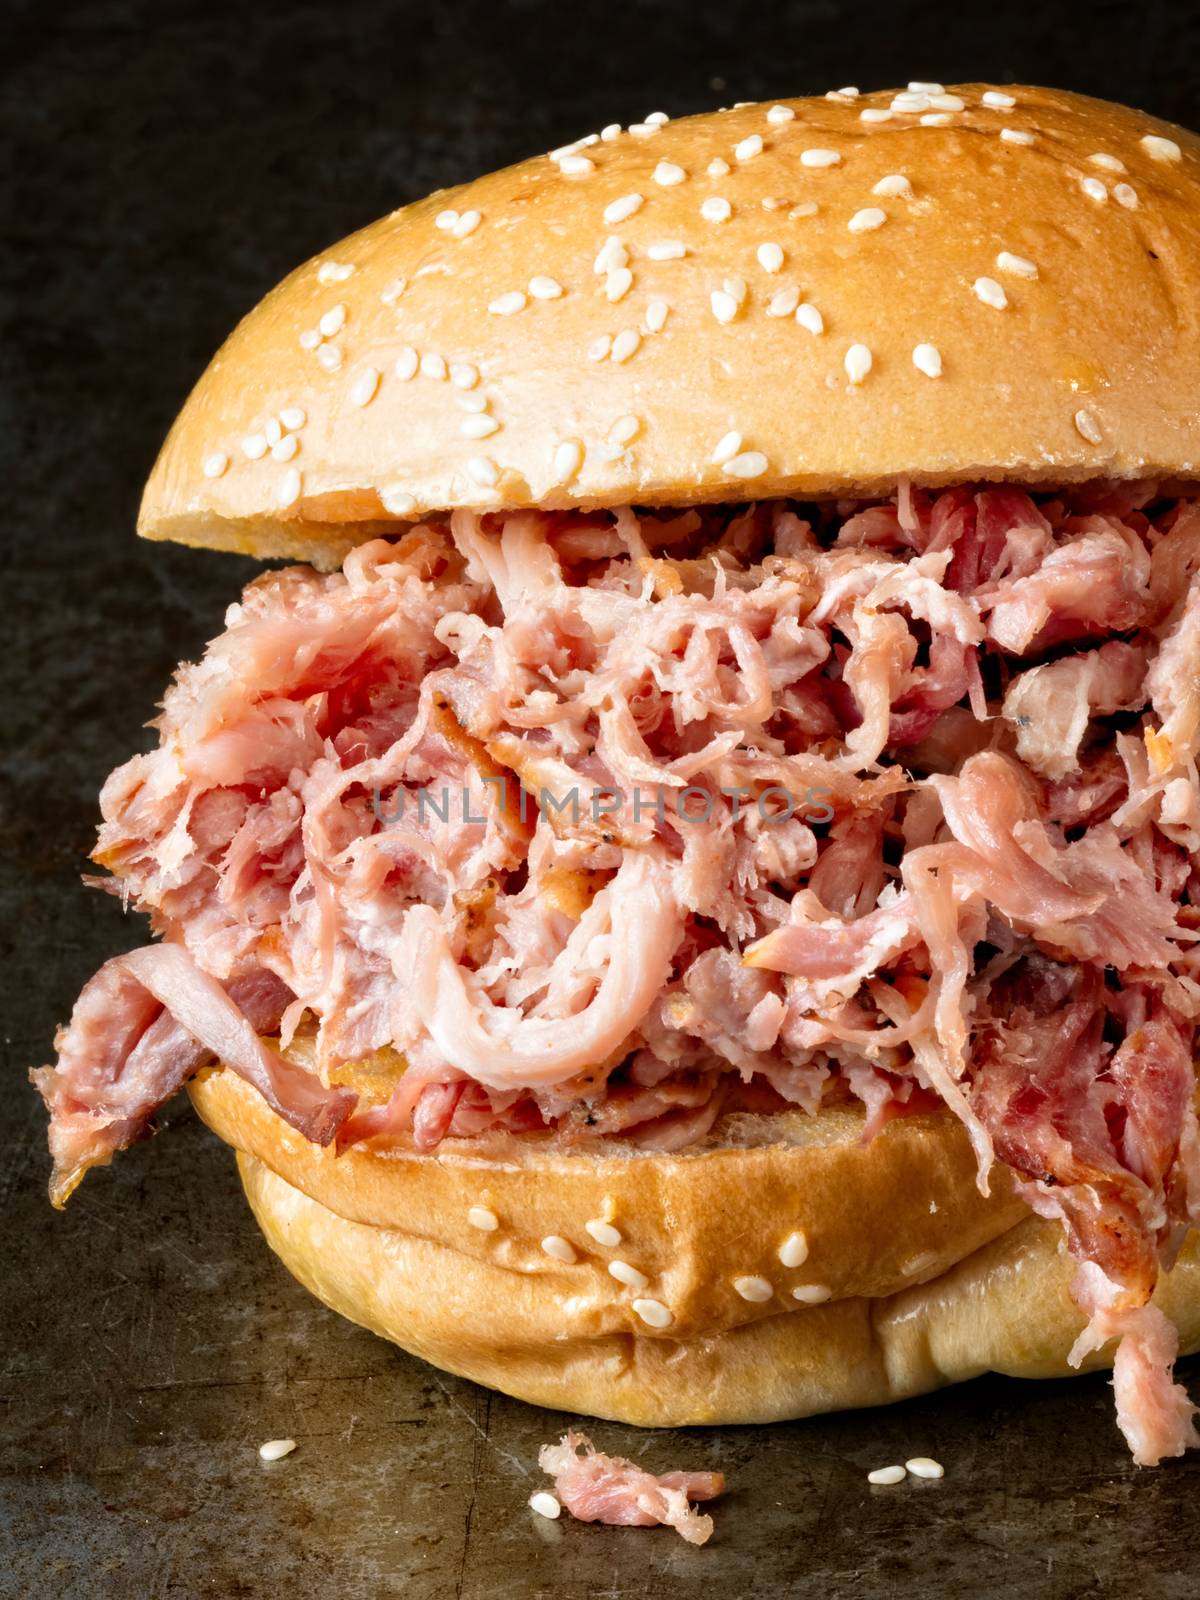 rustic american barbecued pulled pork sandwich by zkruger